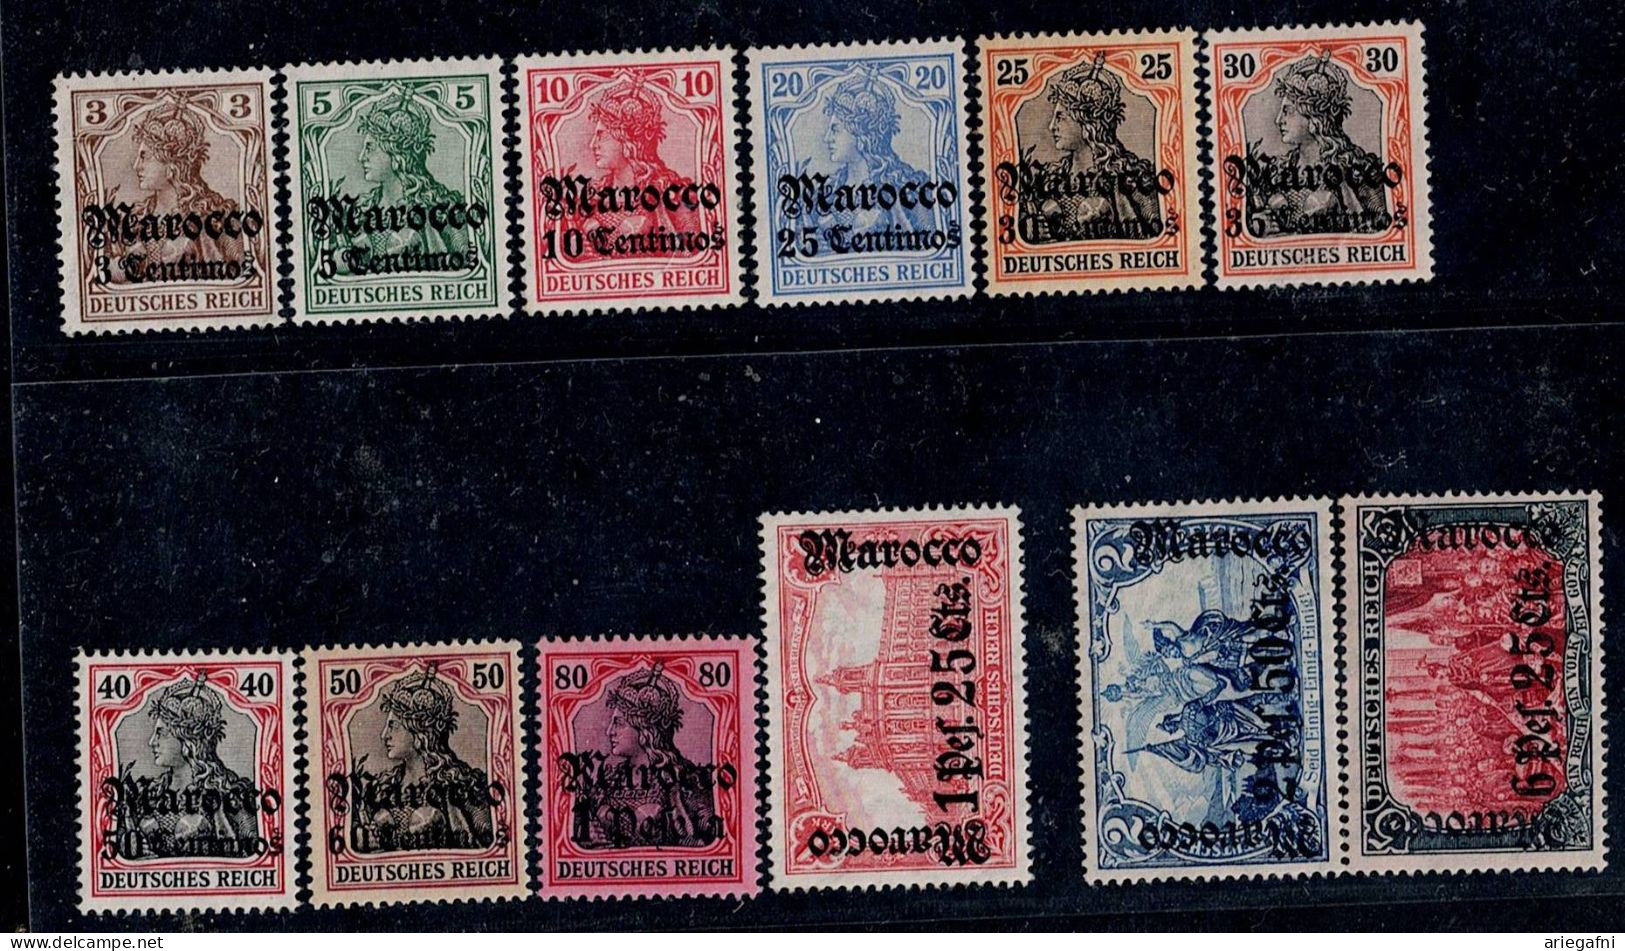 GERMANY 1905  COLONIES POST OFFICE MOROCCO MI No 21-33 MNH VF!! - Morocco (offices)